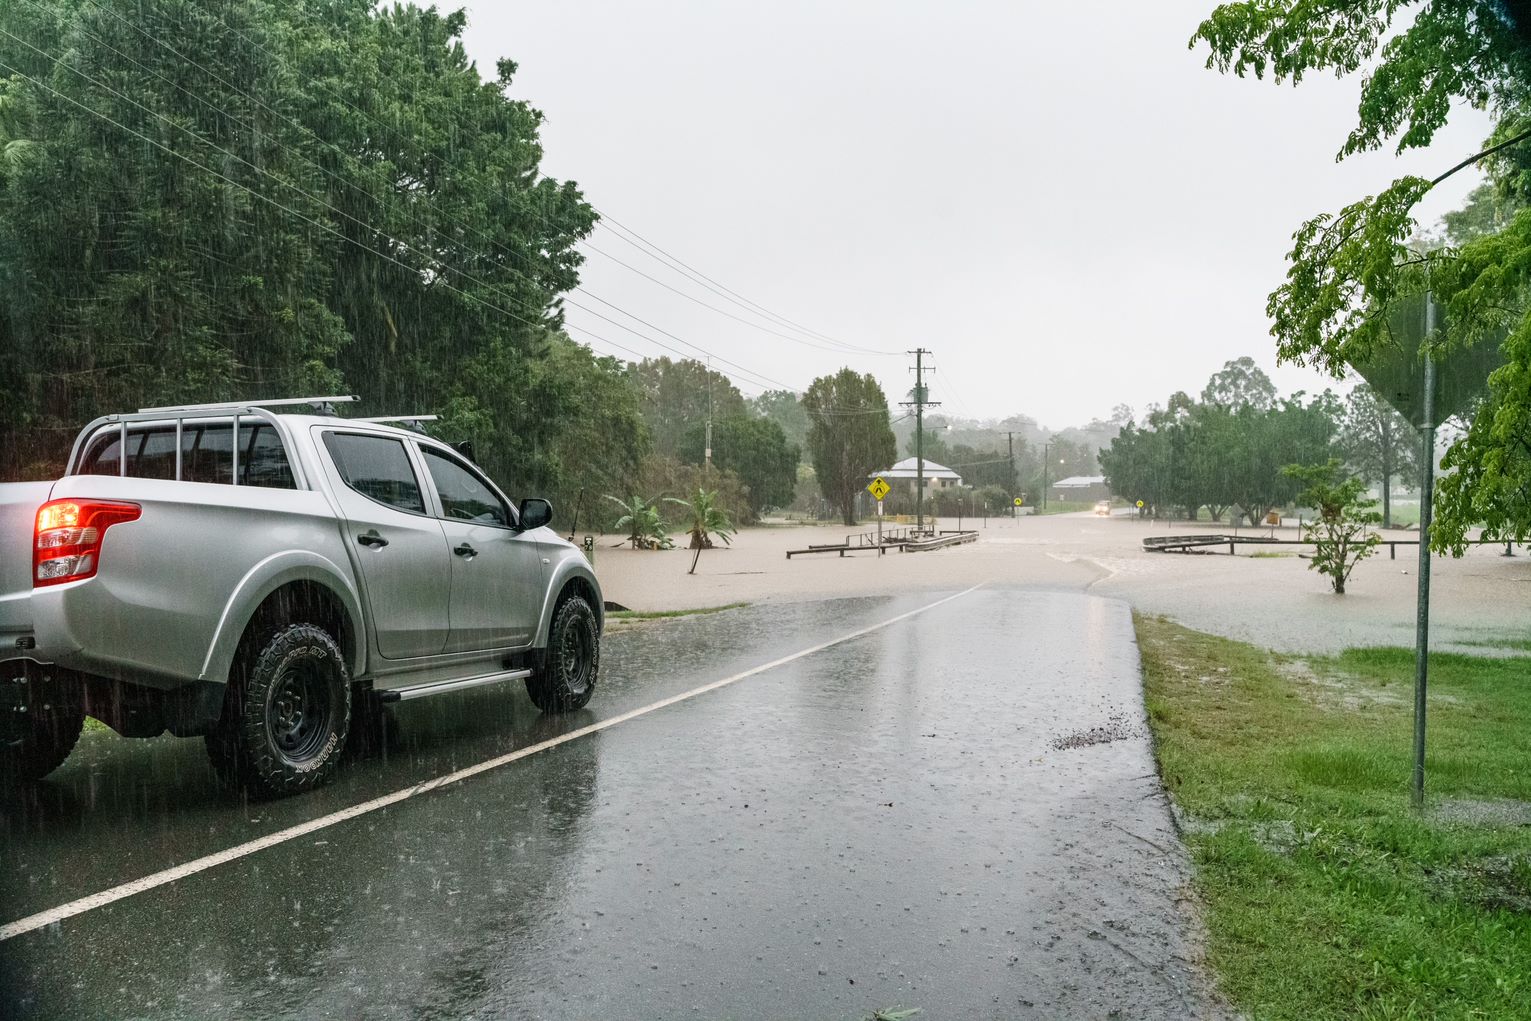 Queensland Fire and Emergency said this morning they're already seeing some roads affected by floodwater from heavy rain overnight, including in the Darling Downs and western areas of south east Queensland. 